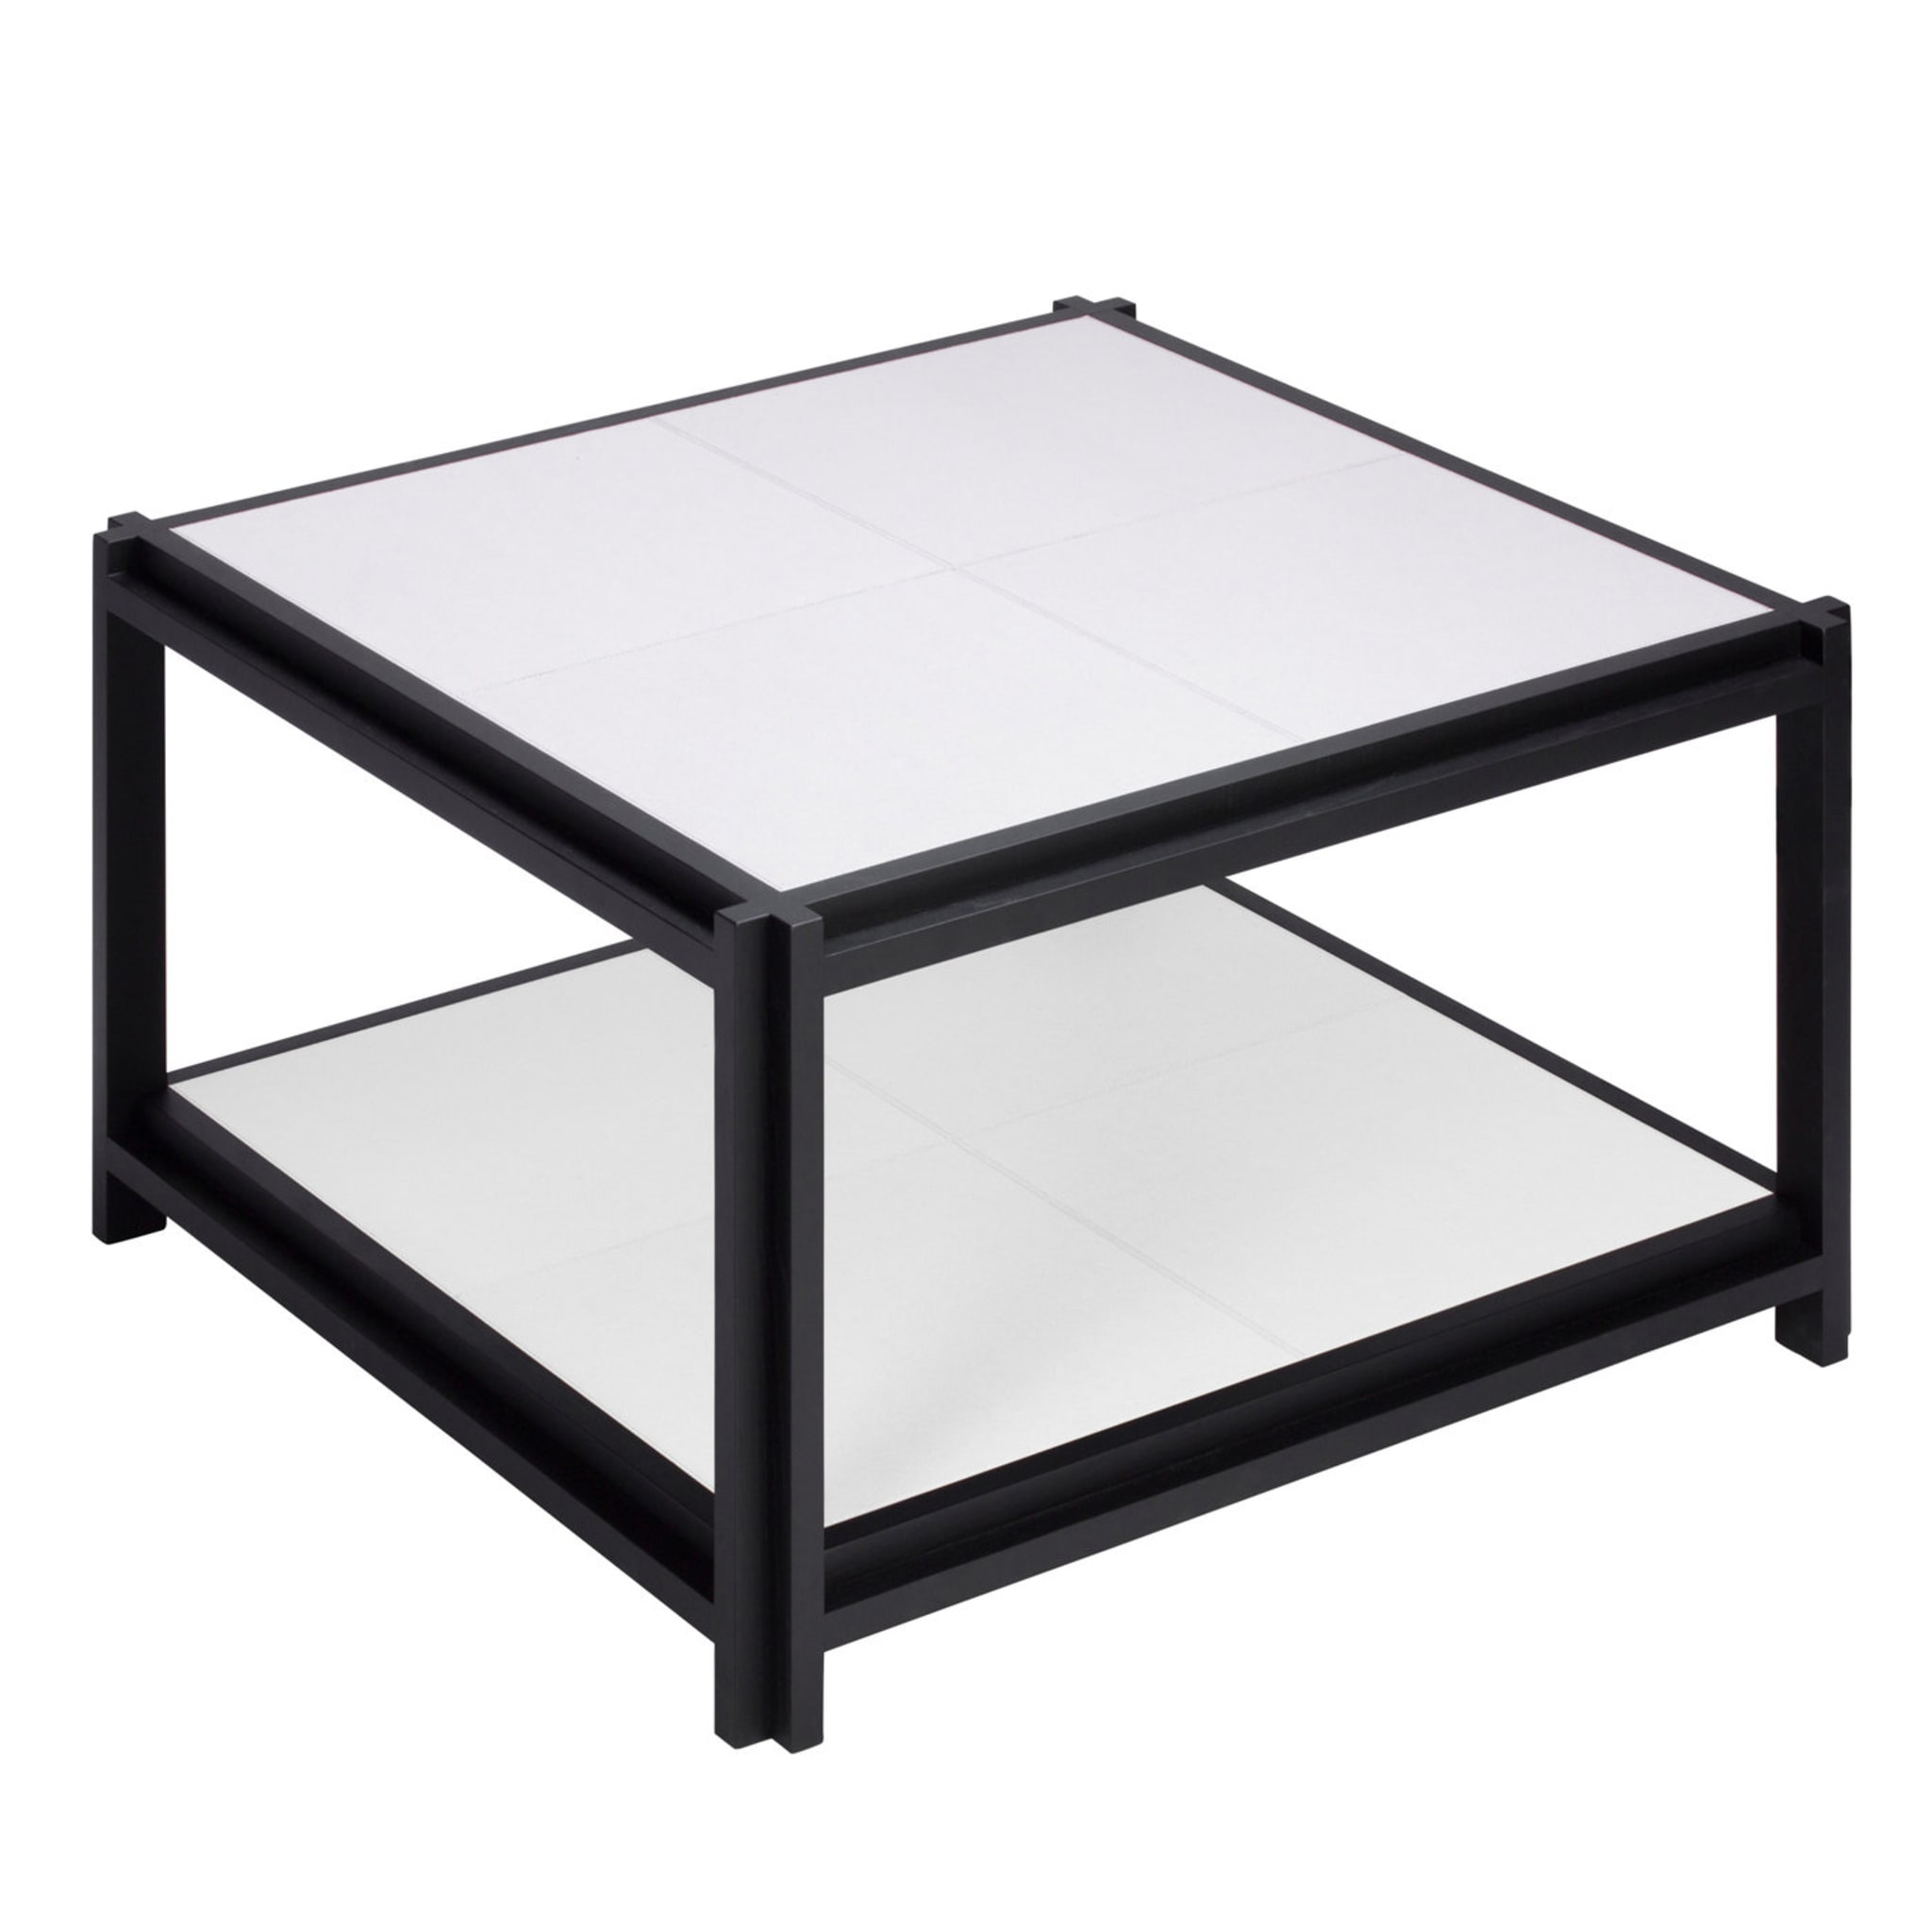 Structura 2-Level Square Coffee Table - Main view